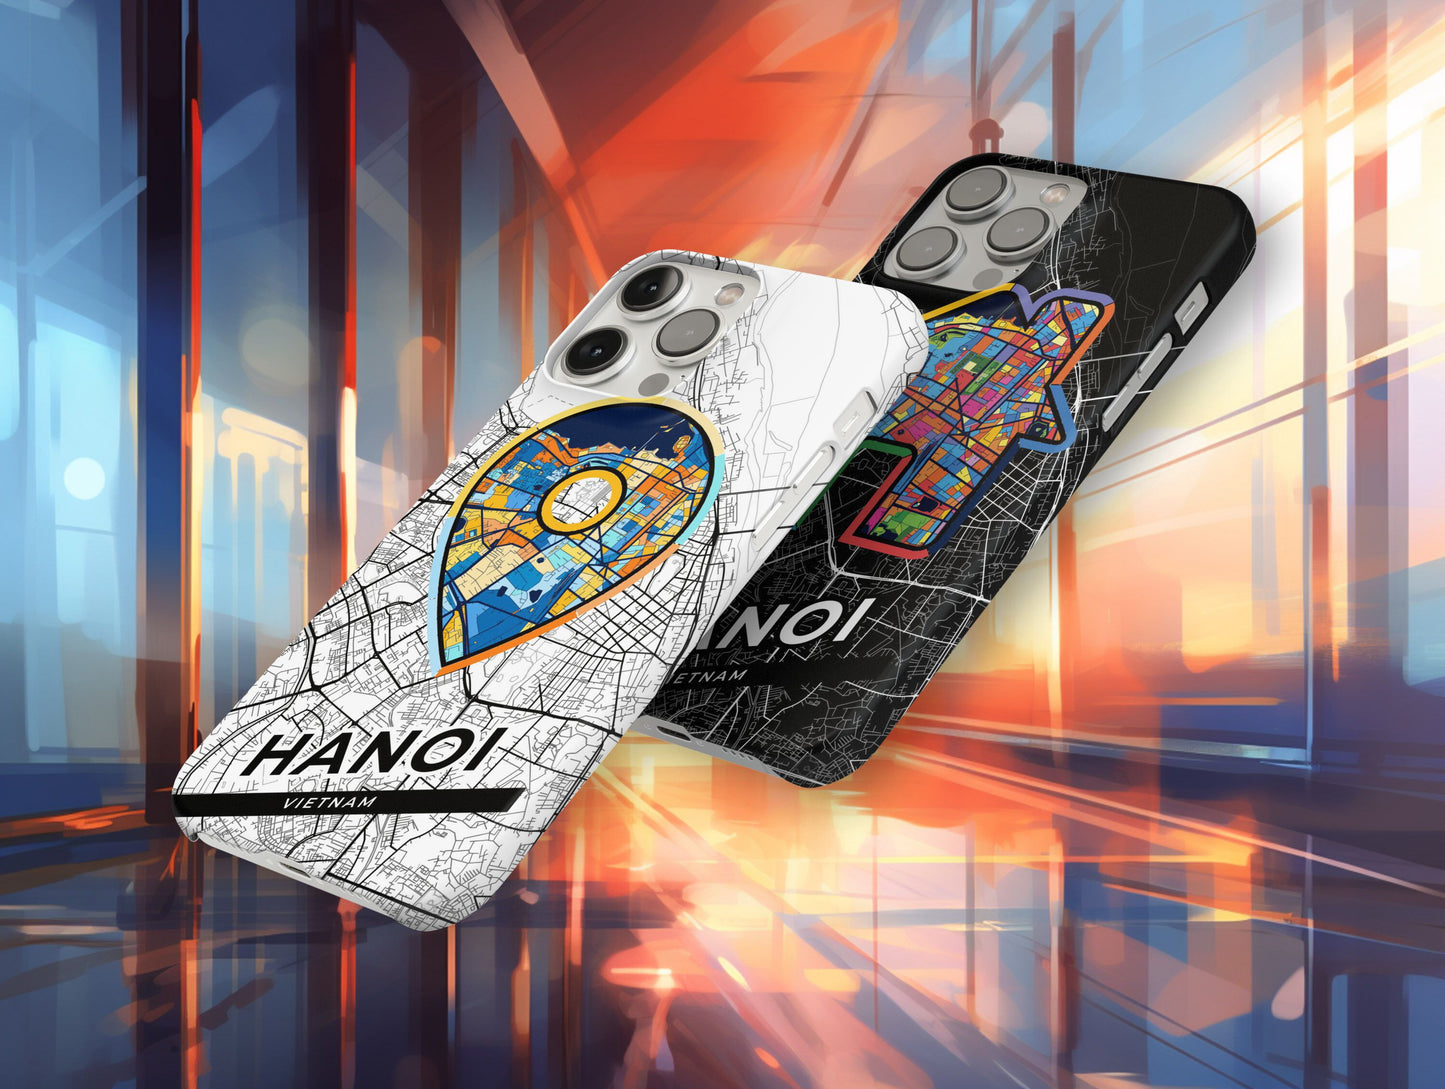 Hanoi Vietnam slim phone case with colorful icon. Birthday, wedding or housewarming gift. Couple match cases.